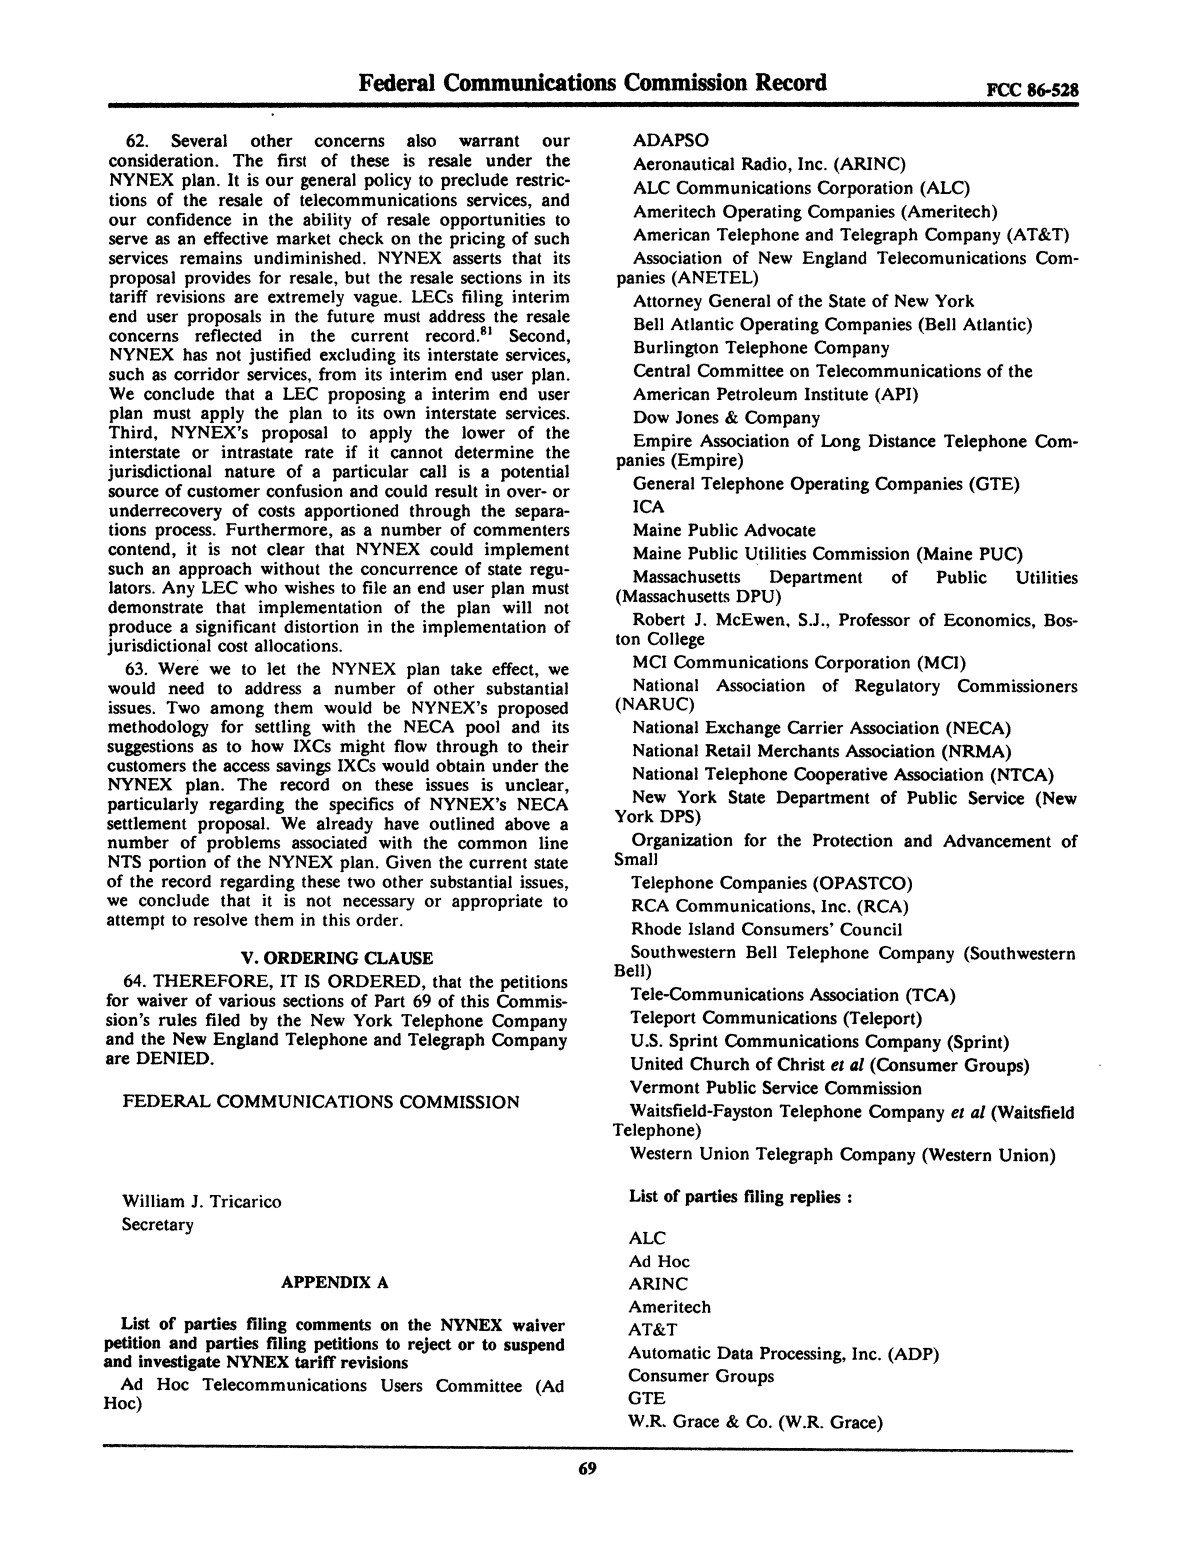 FCC Record, Volume 2, No. 1, Pages 1 to 409, January 5 - January 16, 1987
                                                
                                                    69
                                                